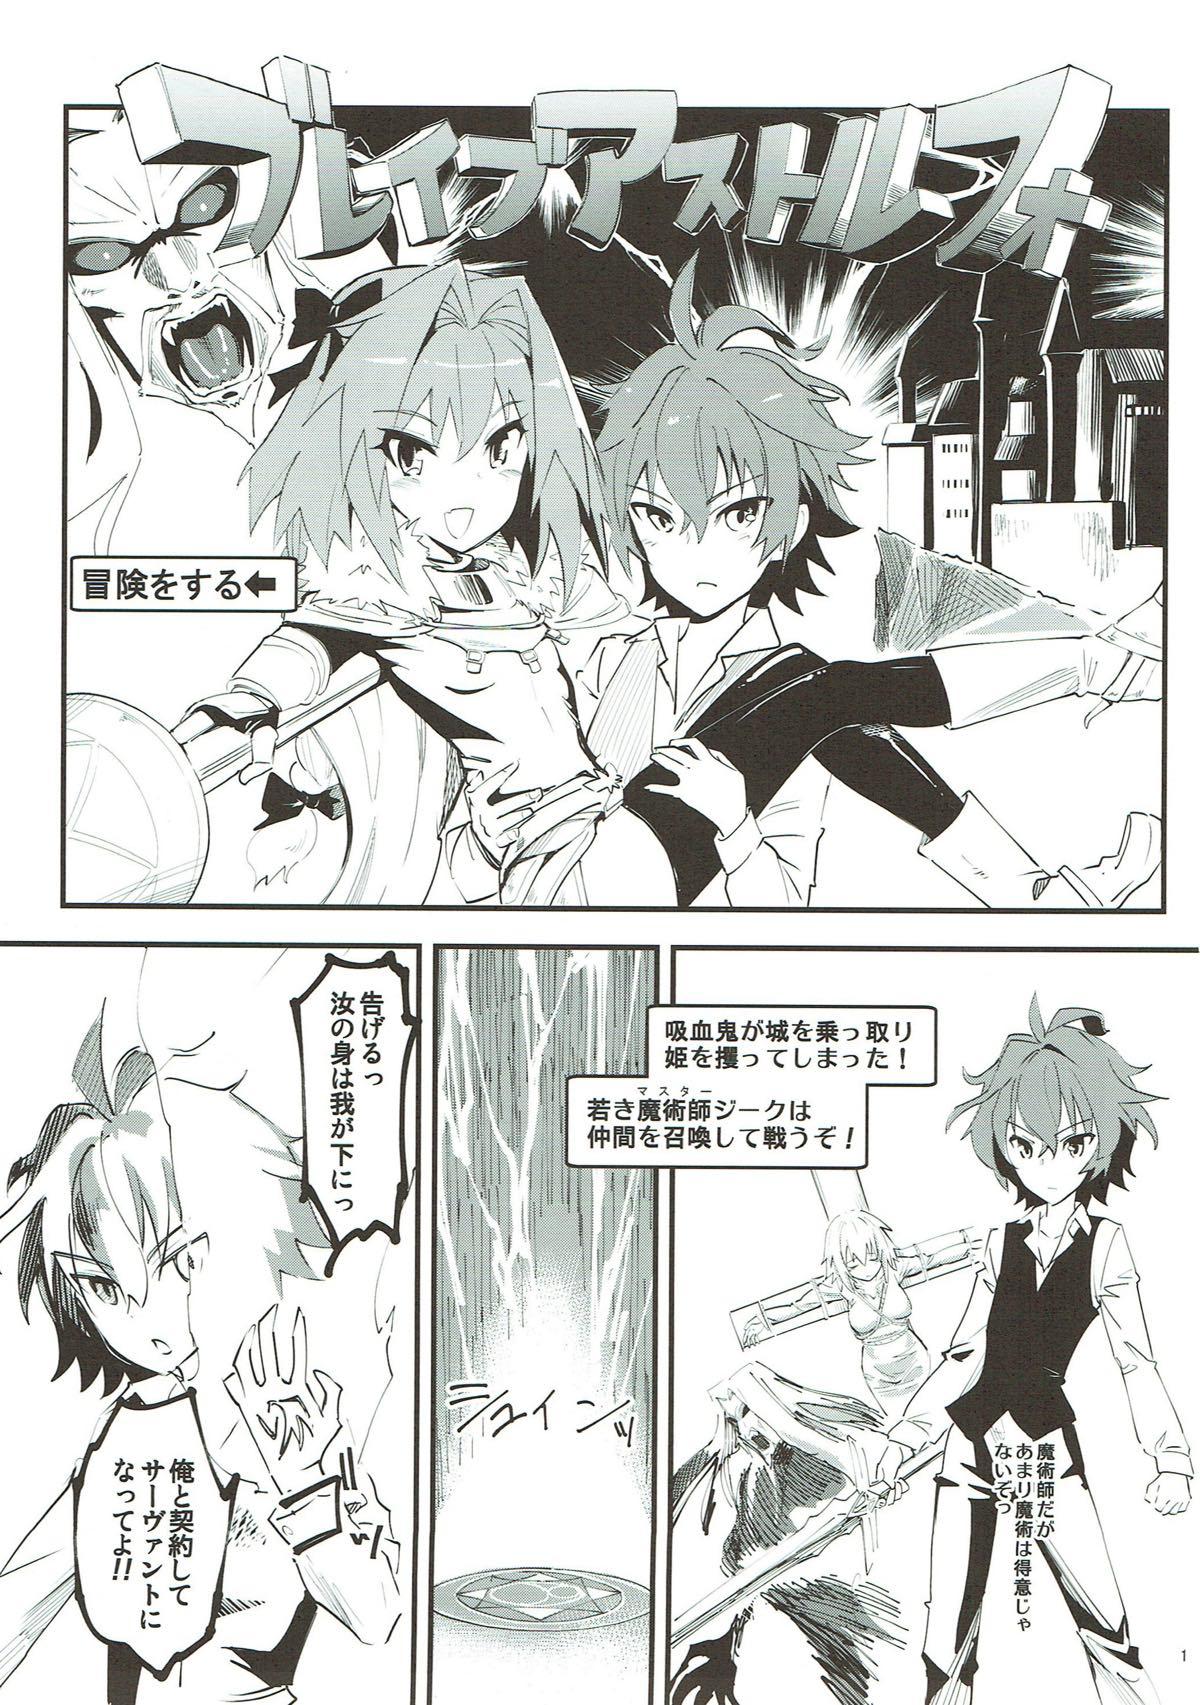 Women Fucking CLASS CHANGE!! Brave Astolfo - Fate apocrypha Female Orgasm - Page 2